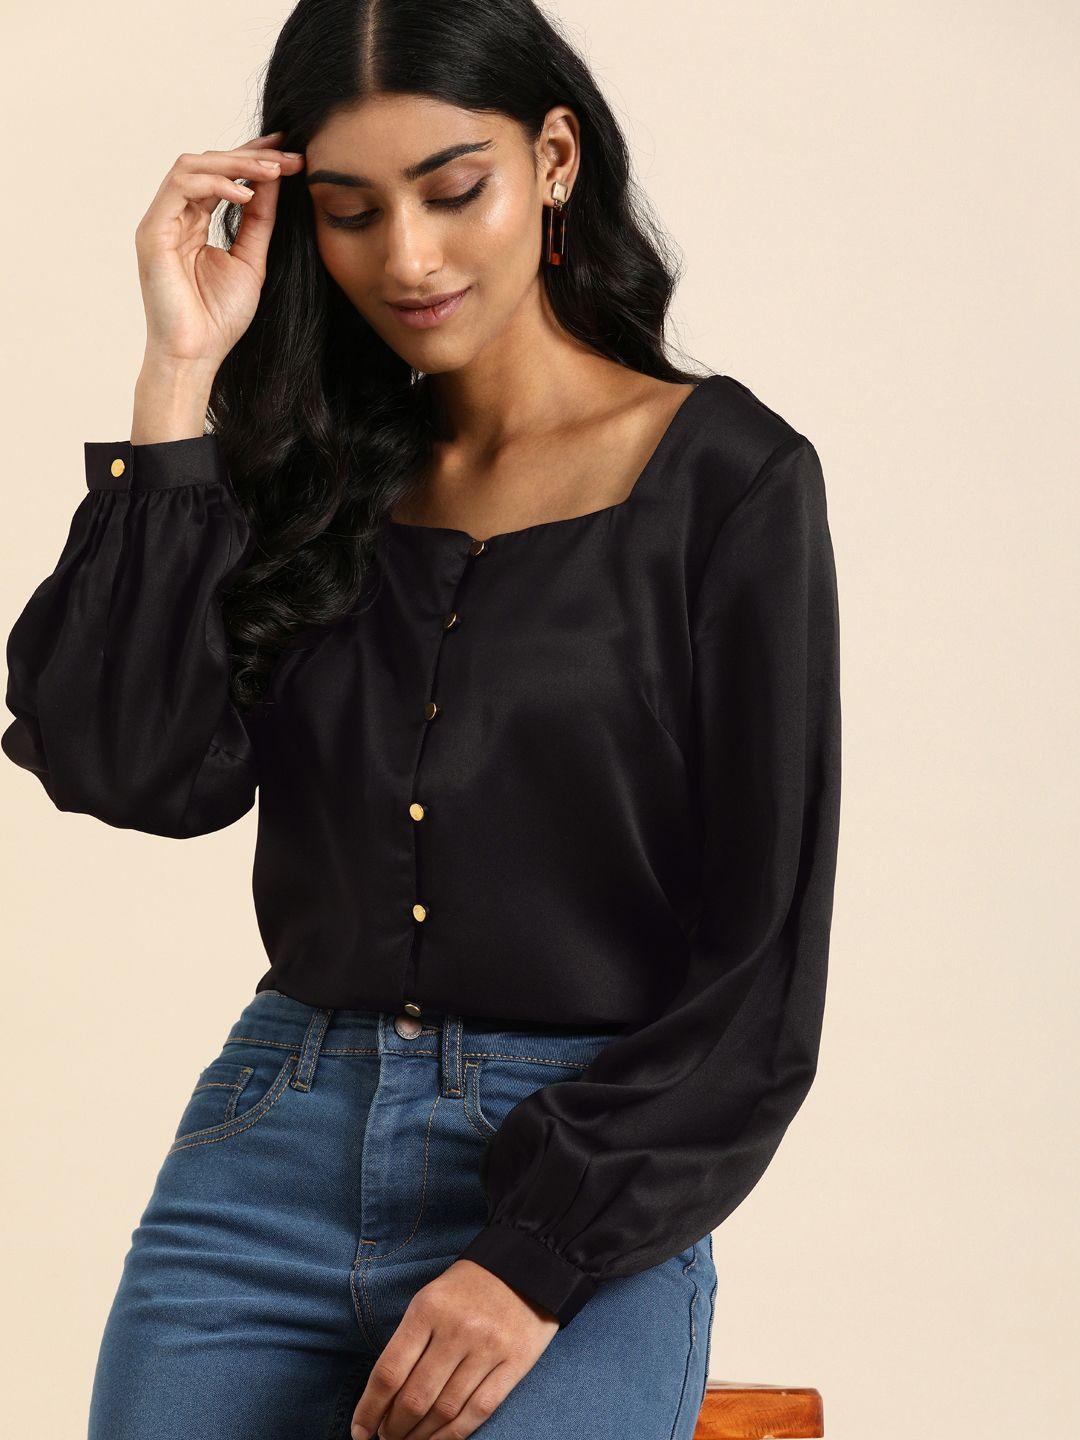 all-about-you-jet-black-solid-square-neck-cuffed-sleeves-polyester-regular-top